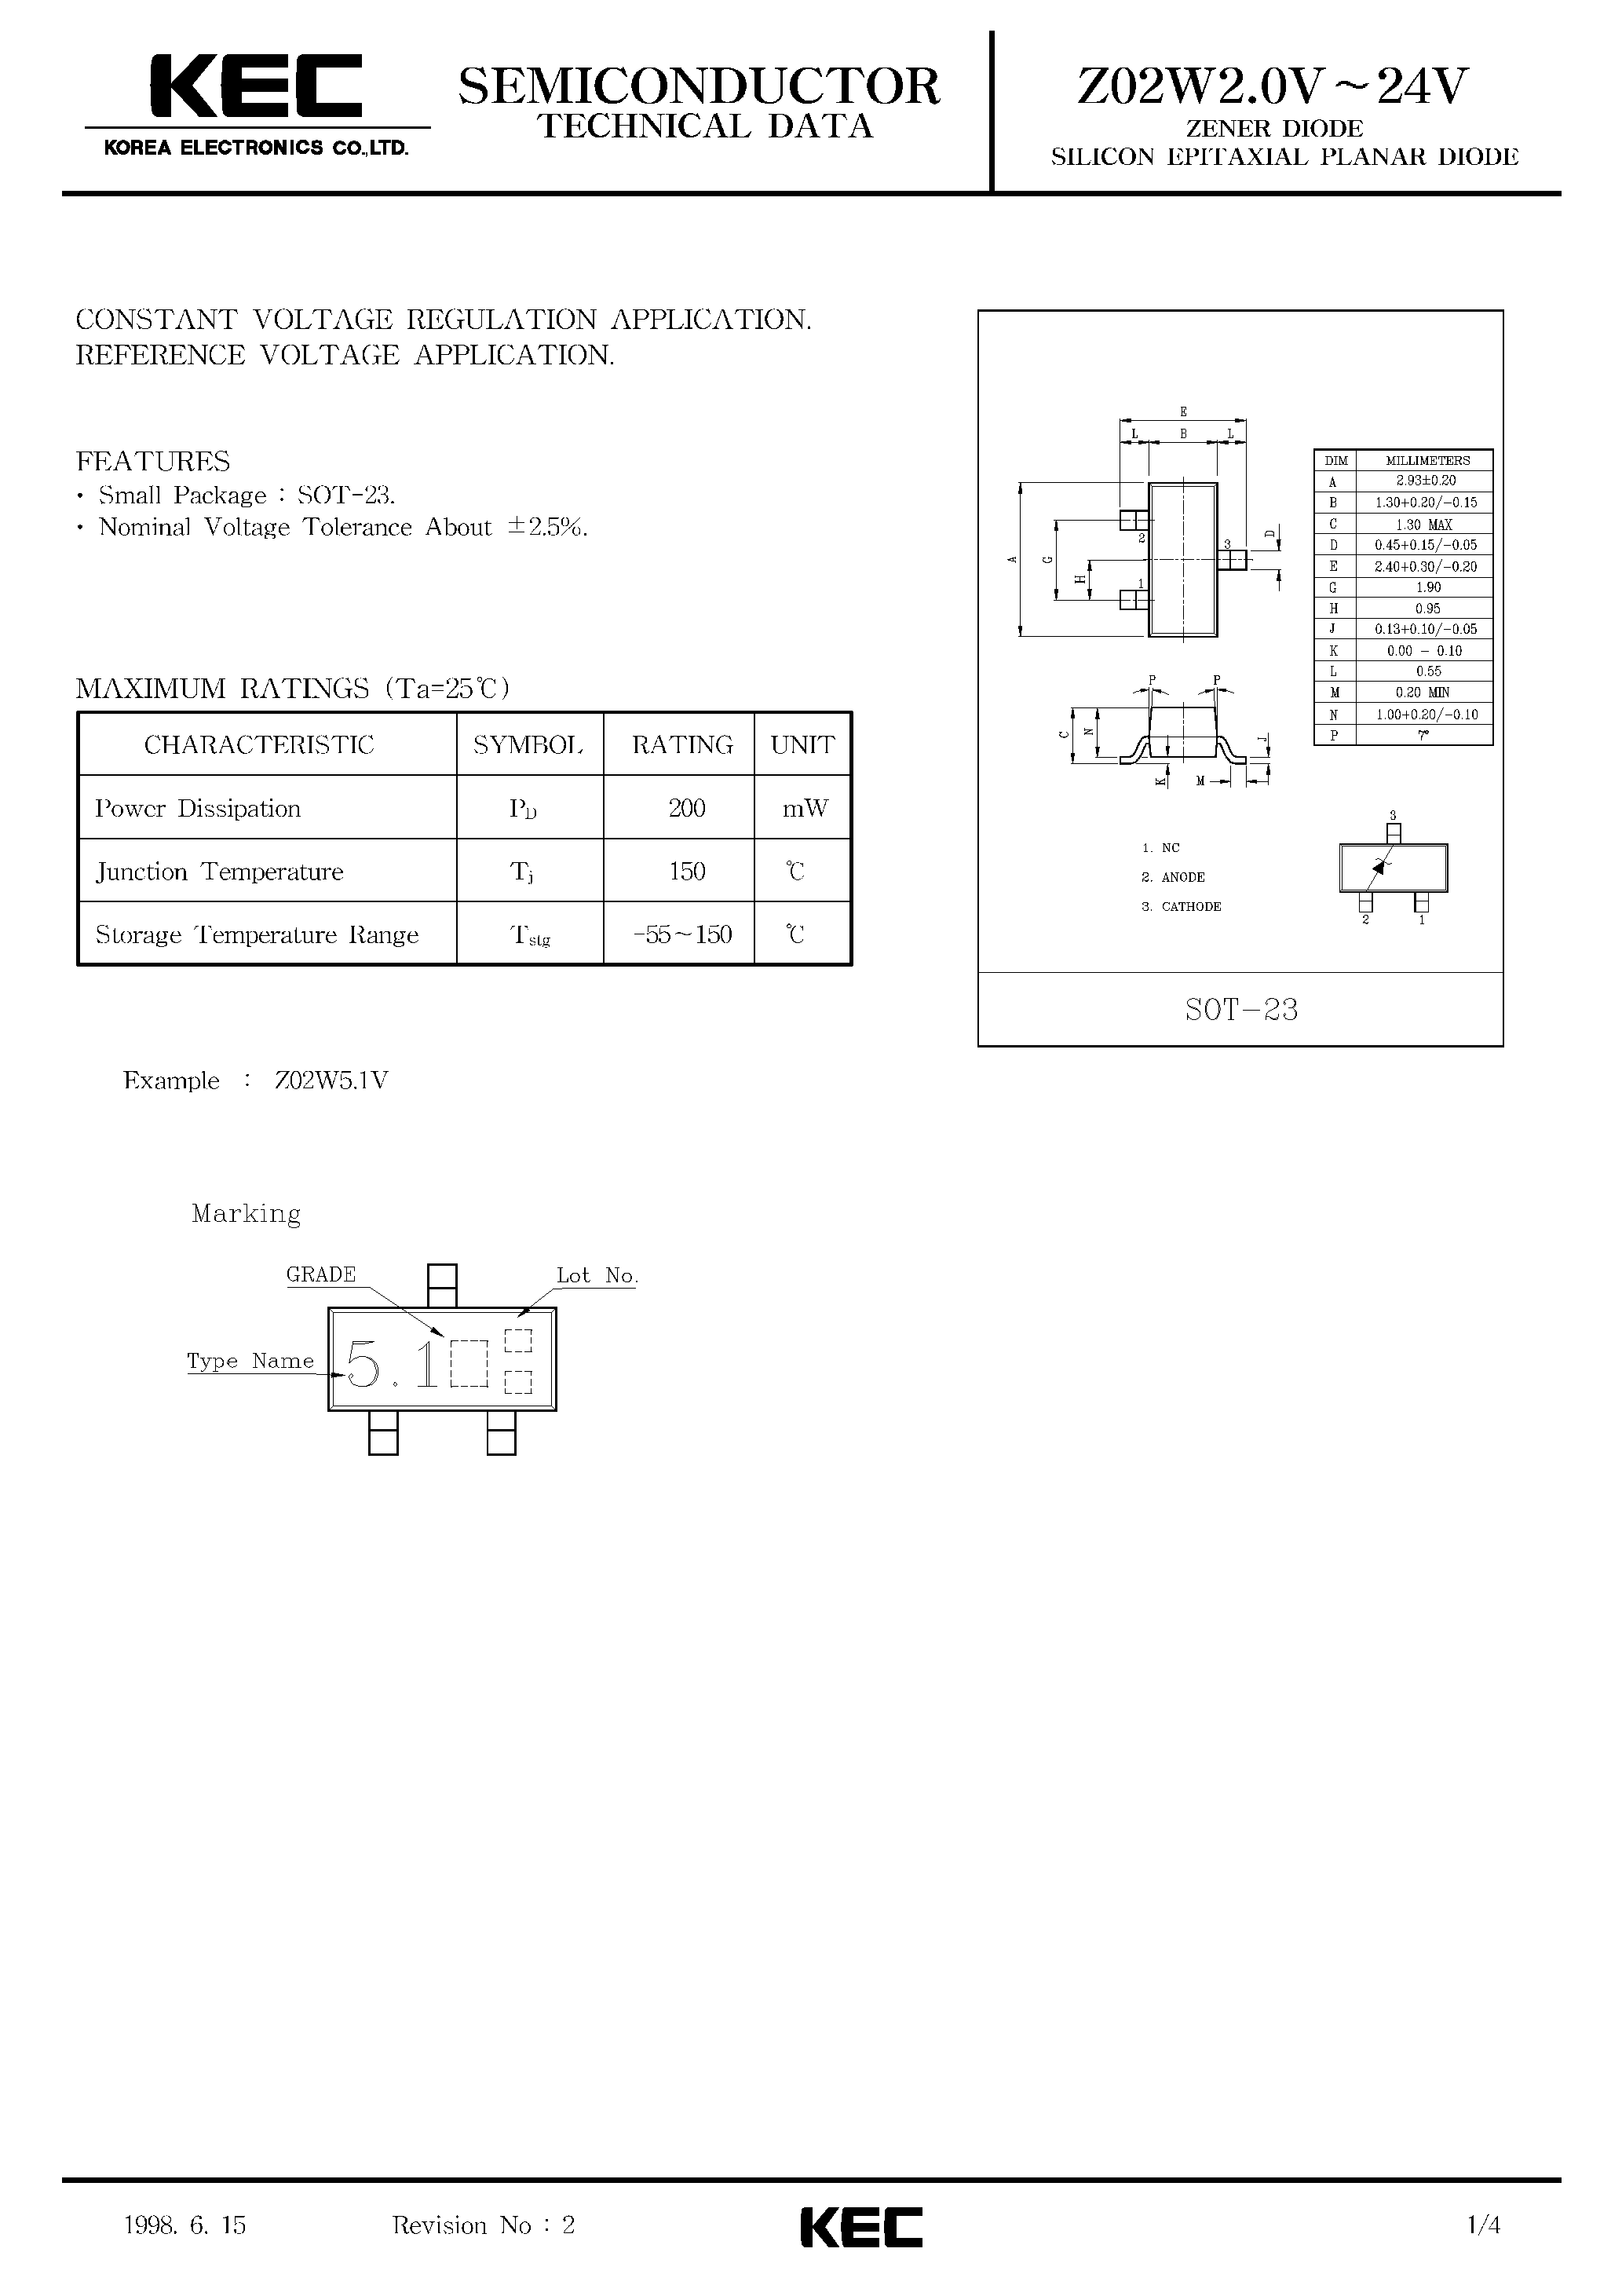 Datasheet Z02W8.2V - ZENER DIODE SILICON EPITAXIAL PLANAR DIODE page 1